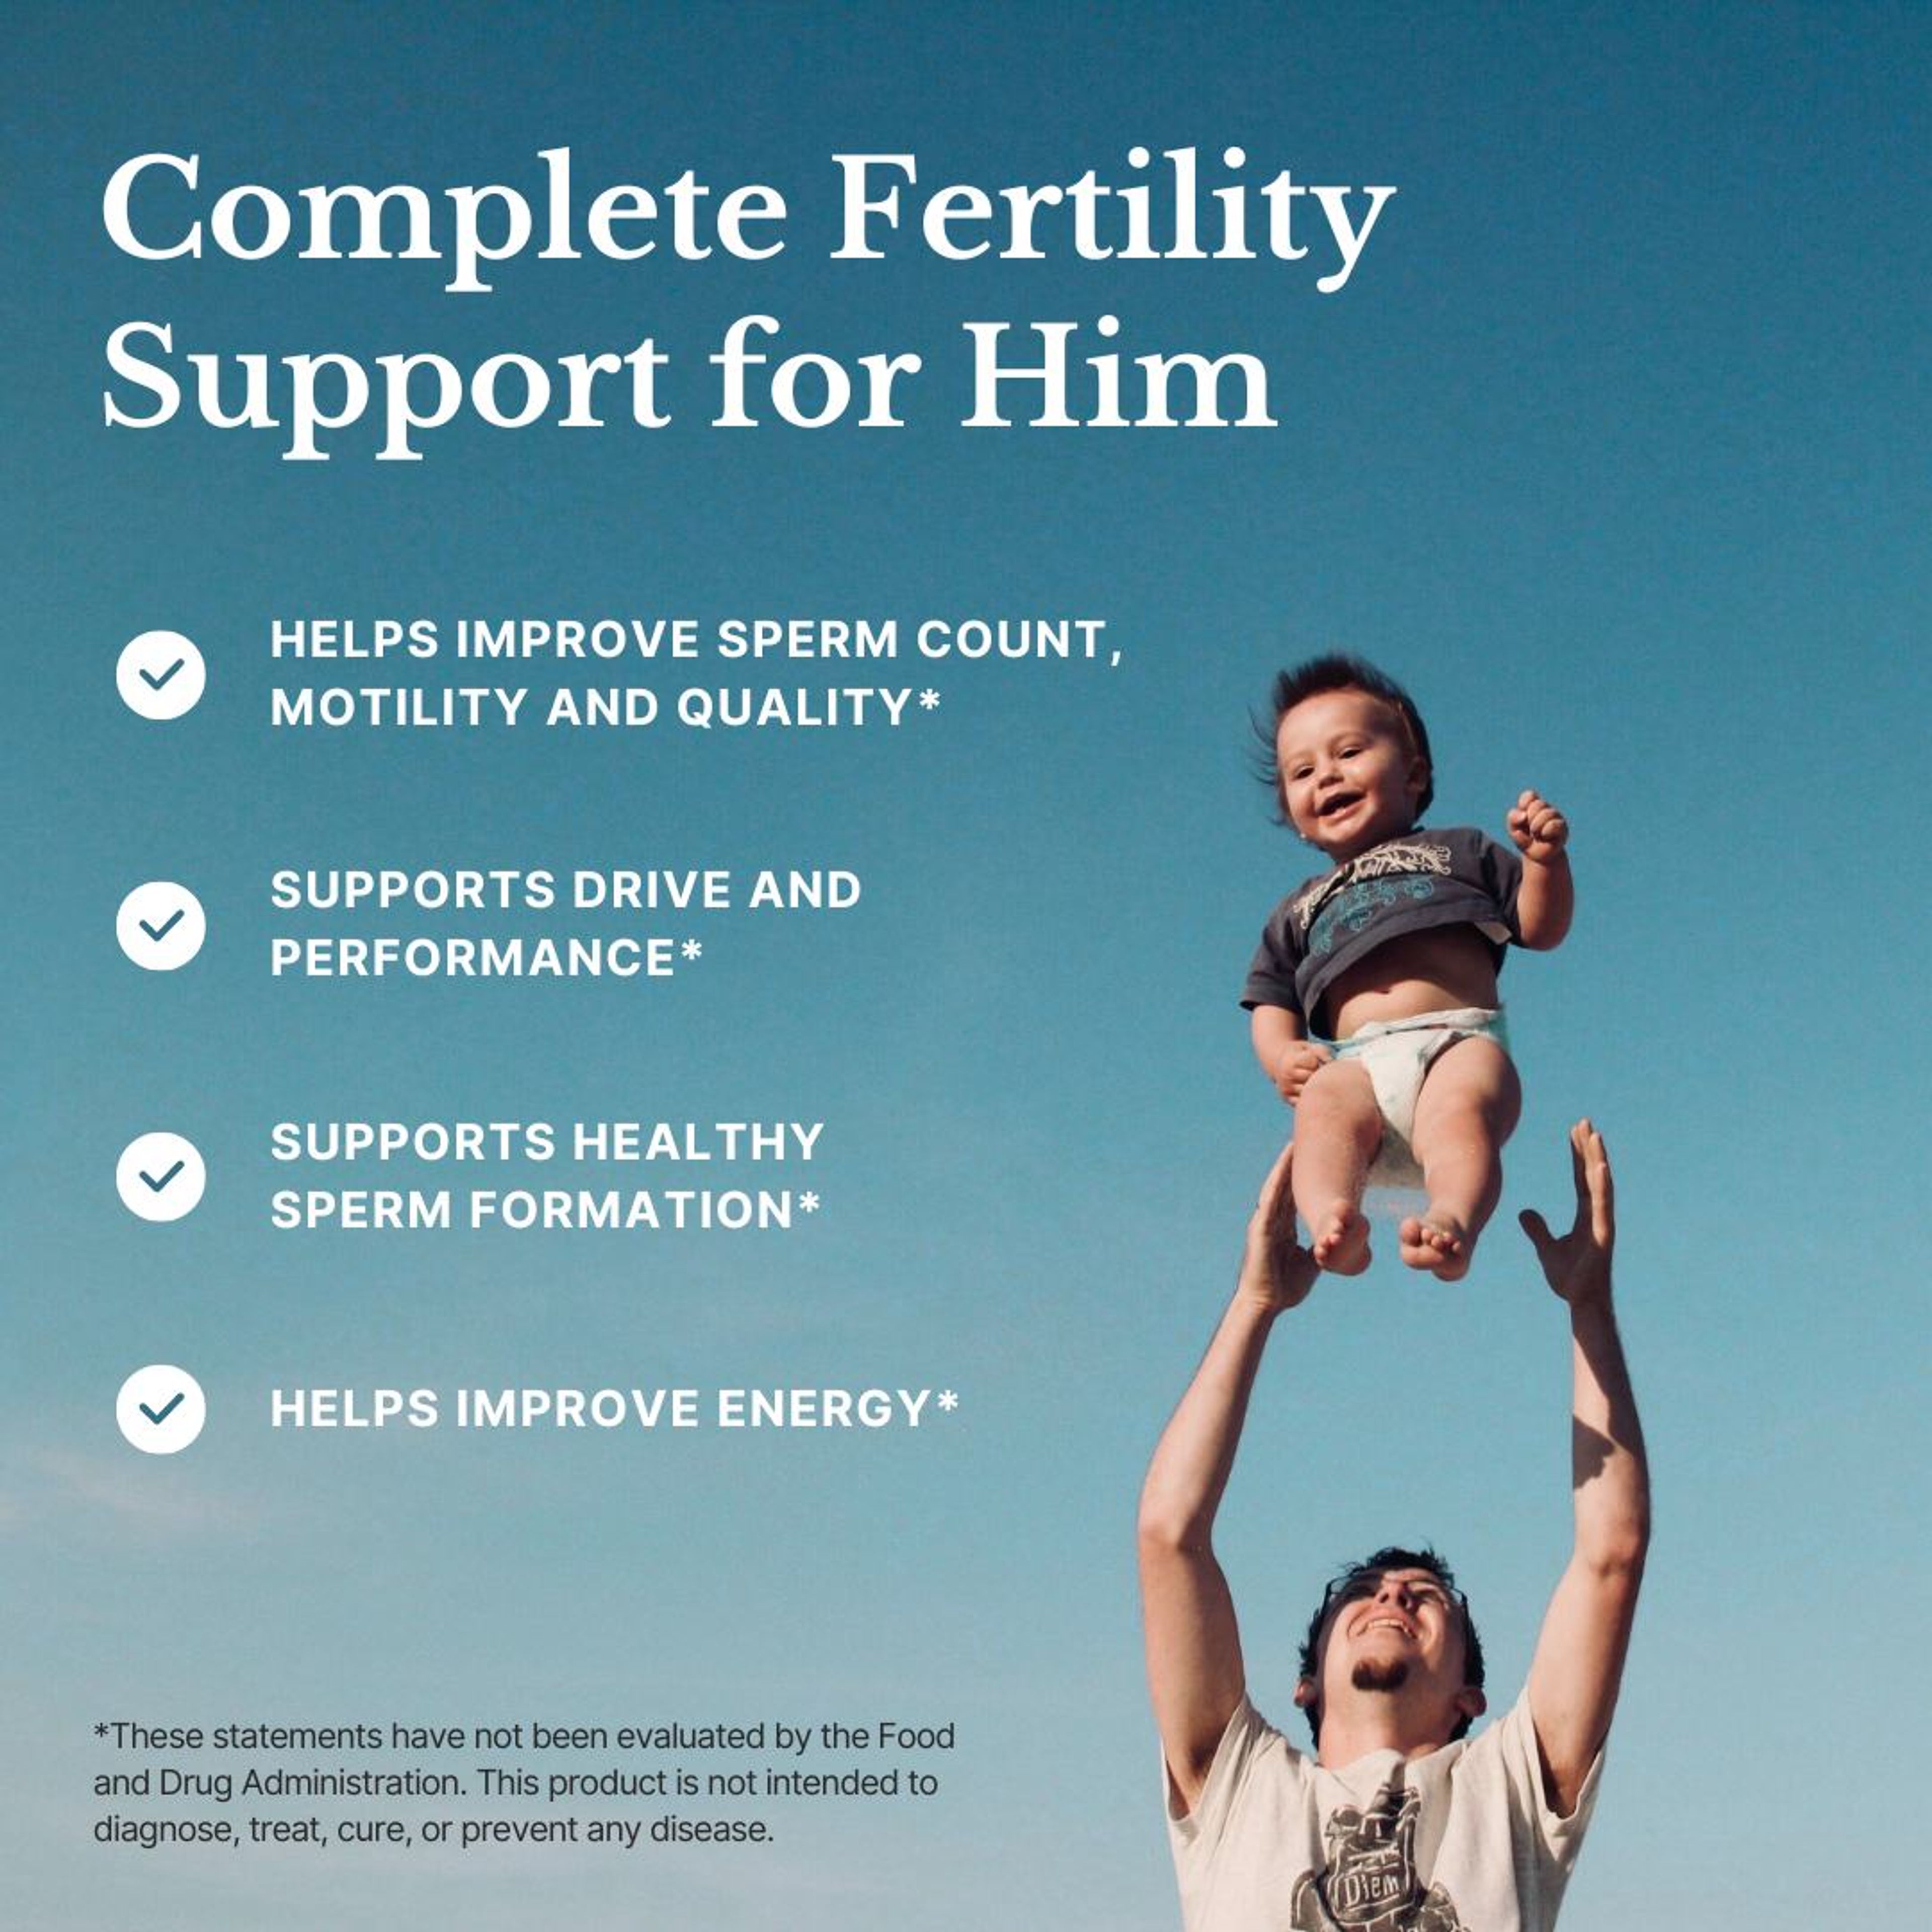 Fertility Support for Both